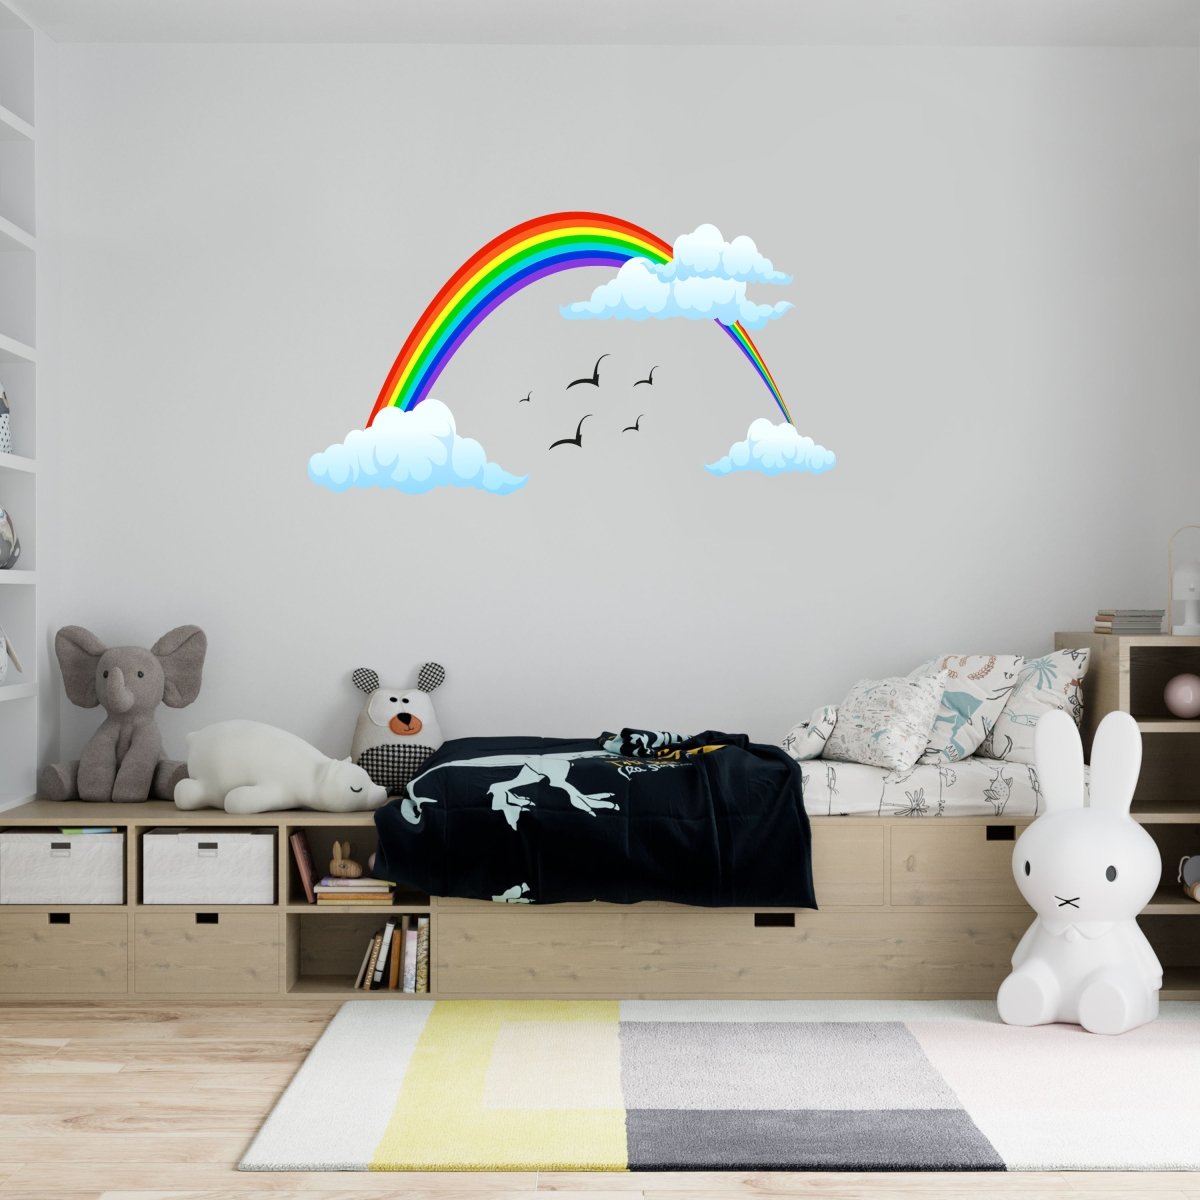 Discover wall stickers colorful rainbow, clouds, birds, sky WS00000059